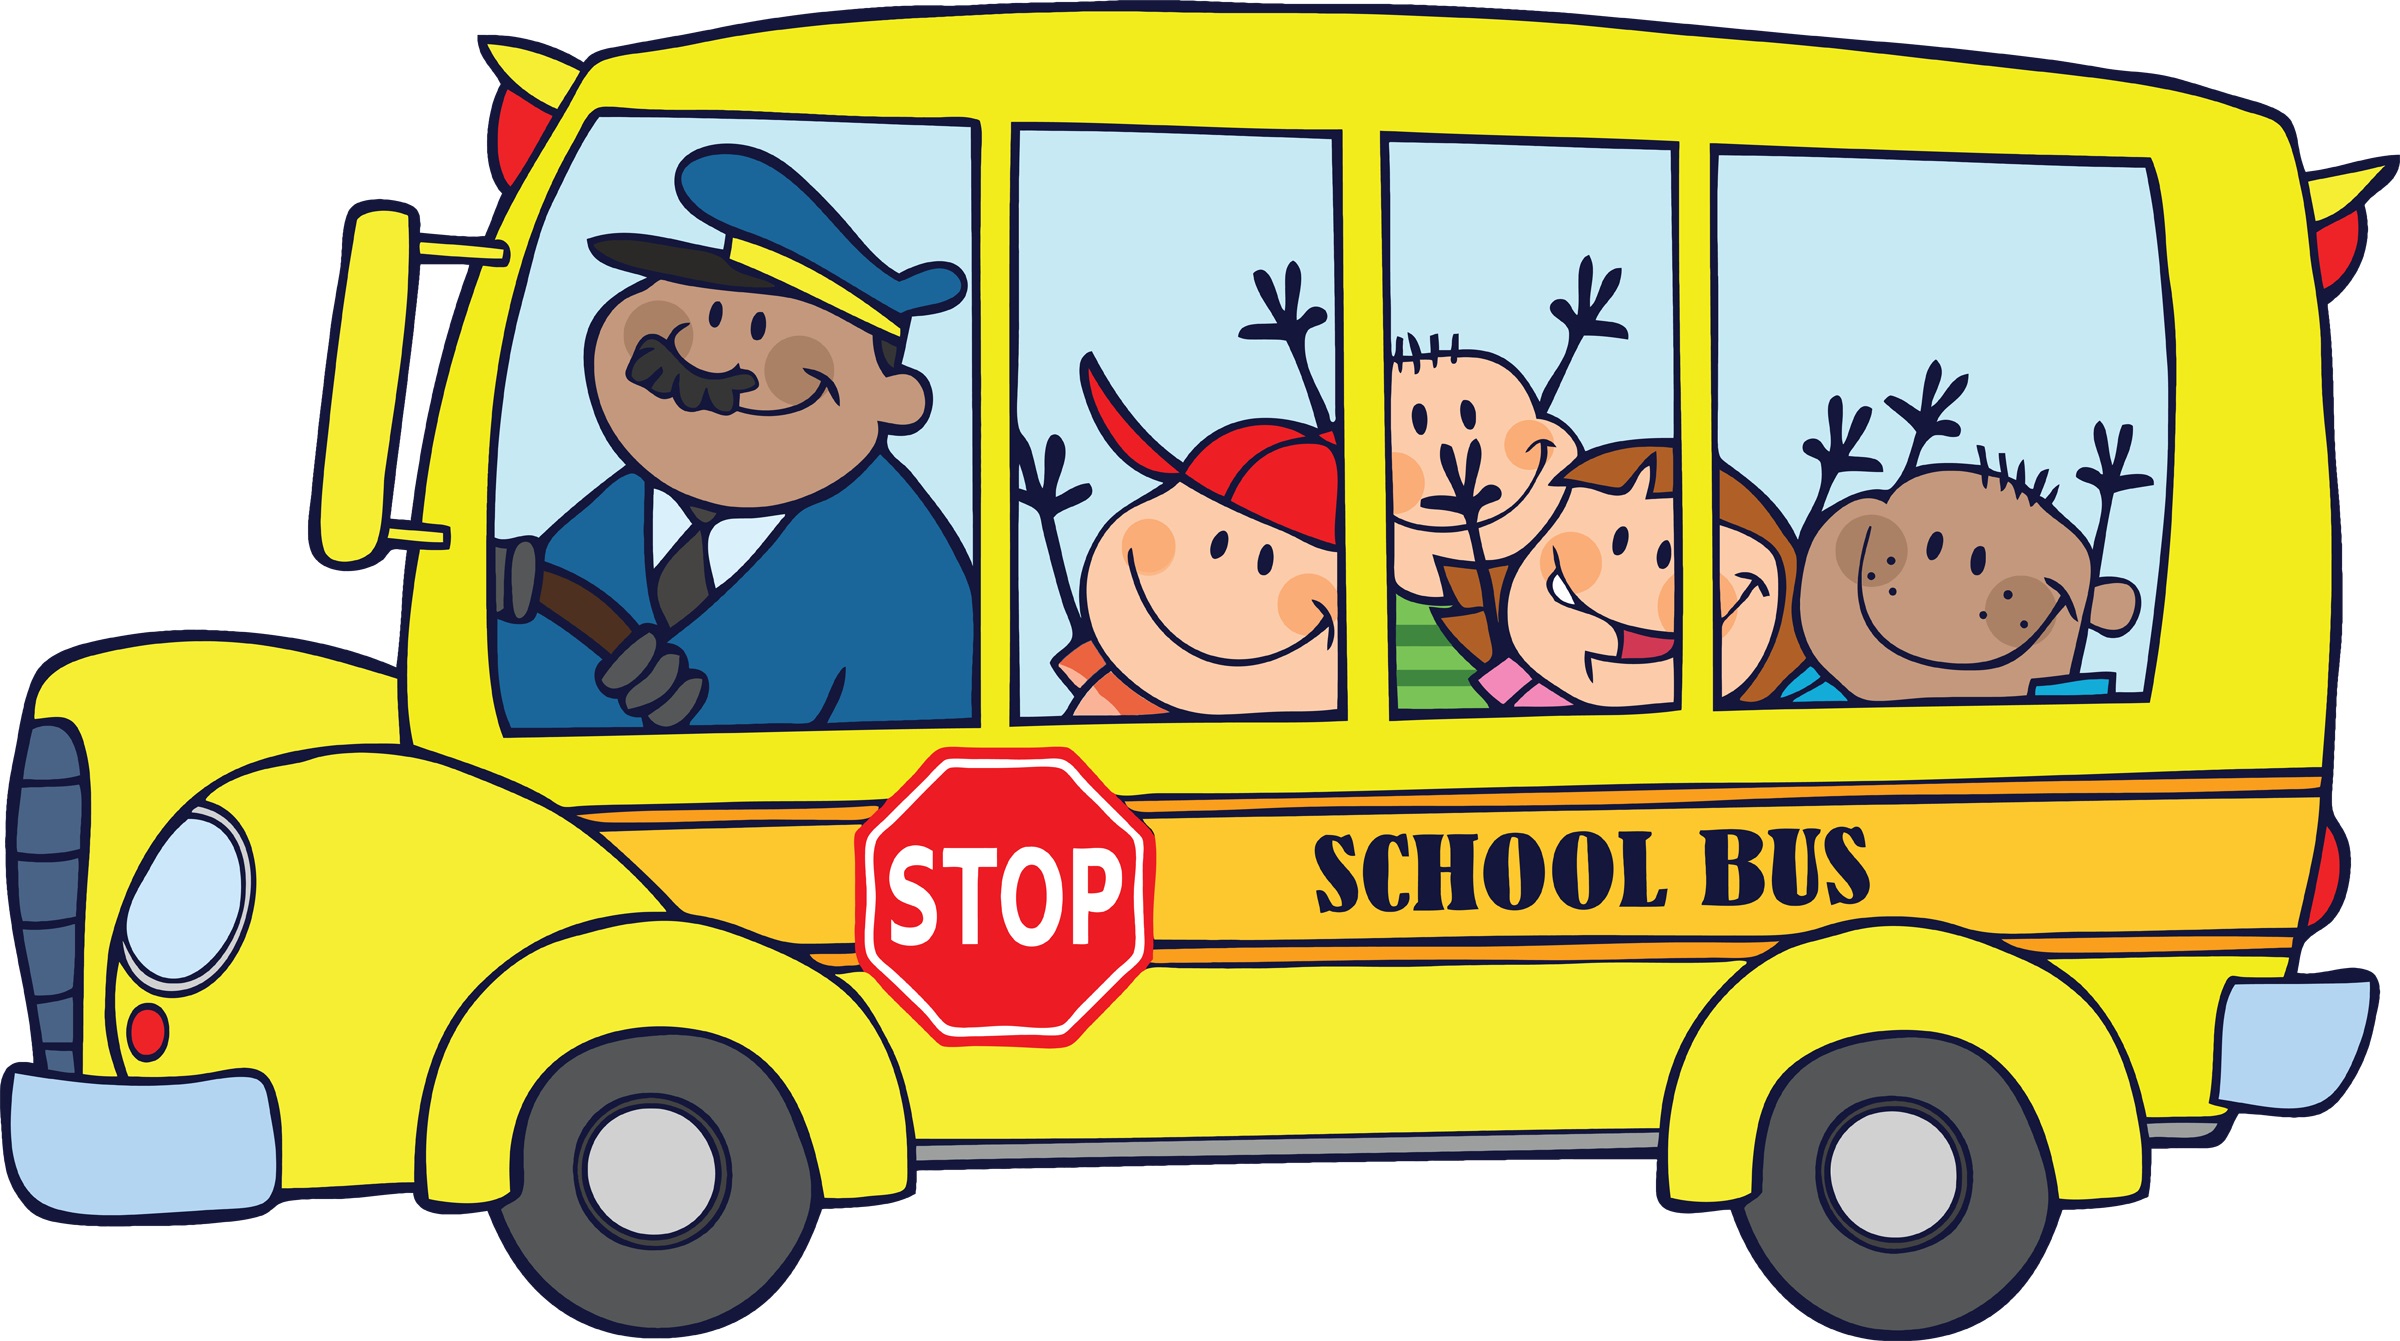 Cartoon bus with smiling driver and waving children.